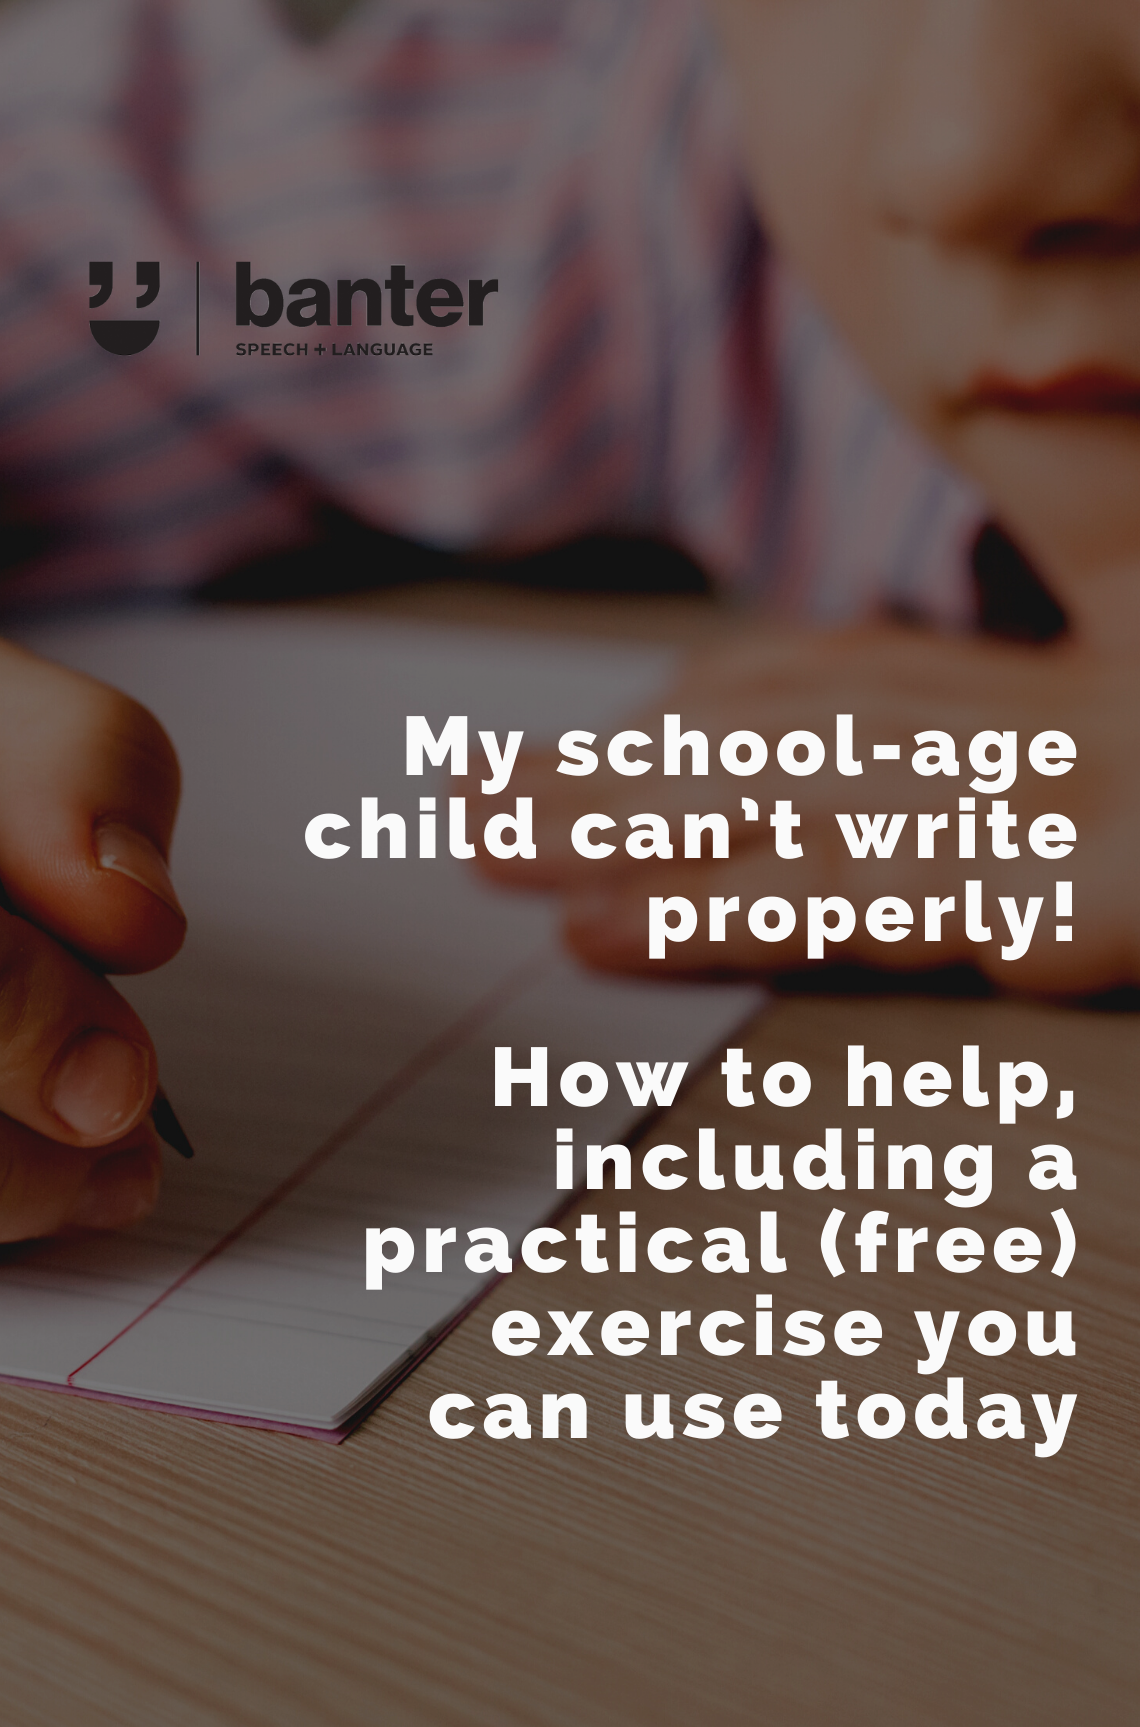 My school-age child can’t write properly! How to help, including a practical (free) exercise you can use today